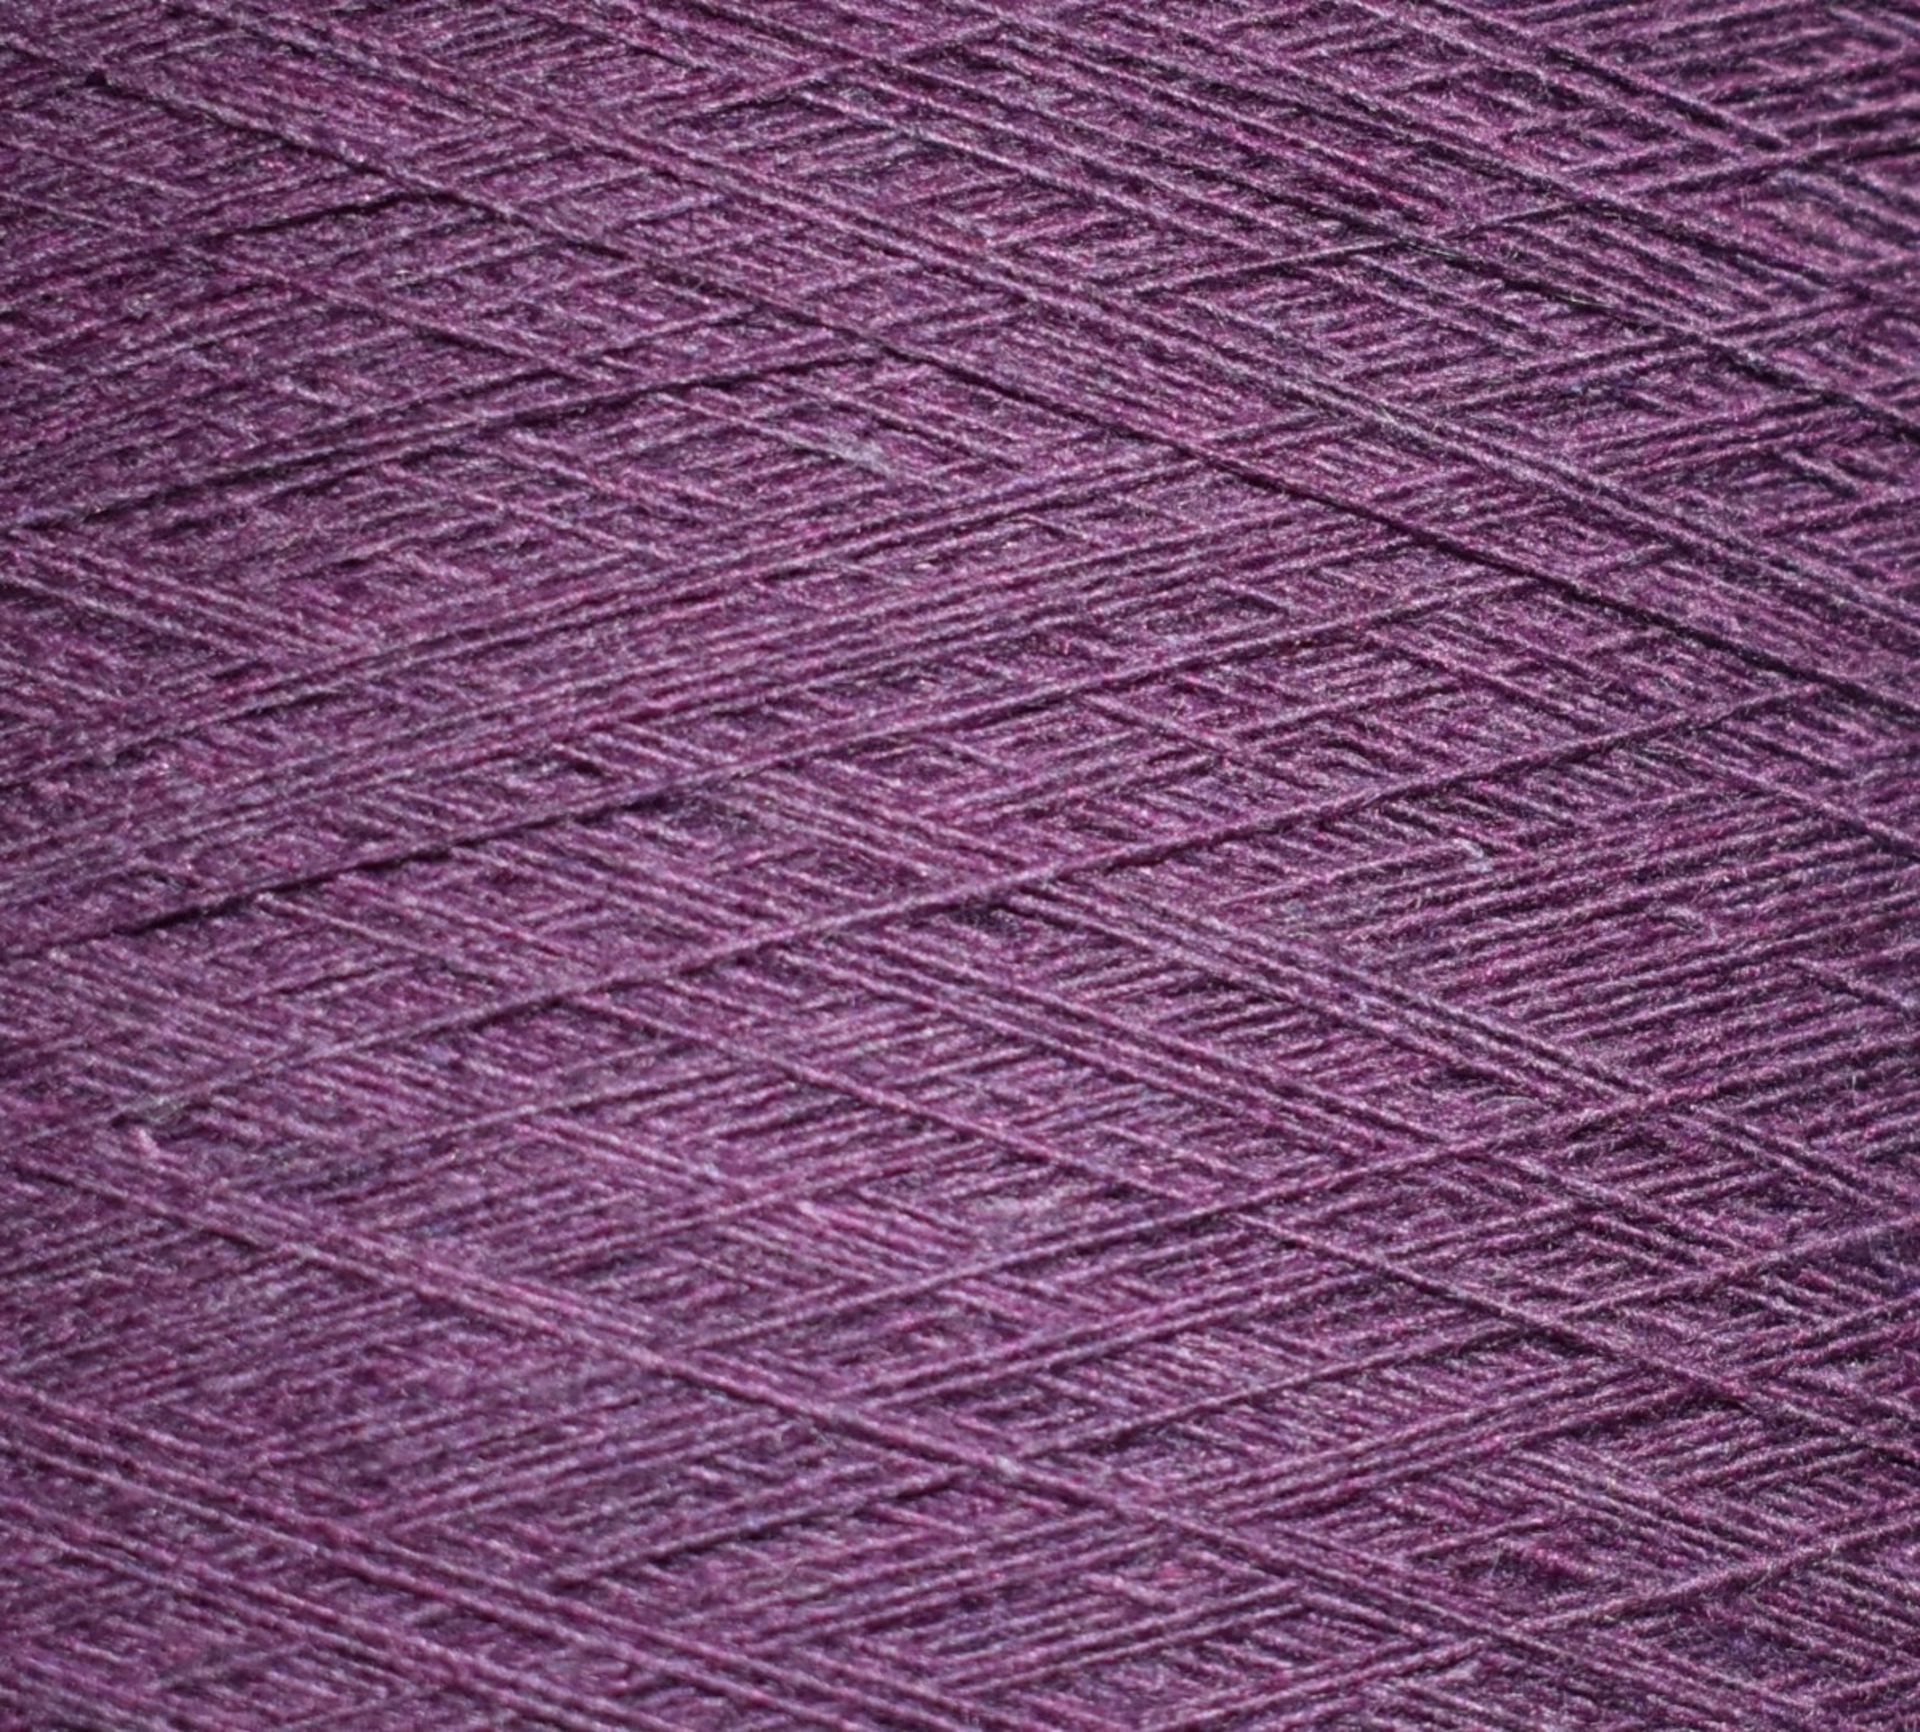 1 x Cone of 1/13 MicroCotton Knitting Yarn - Purple - Approx Weight: 2,300g - New Stock ABL Yarn - Image 8 of 13